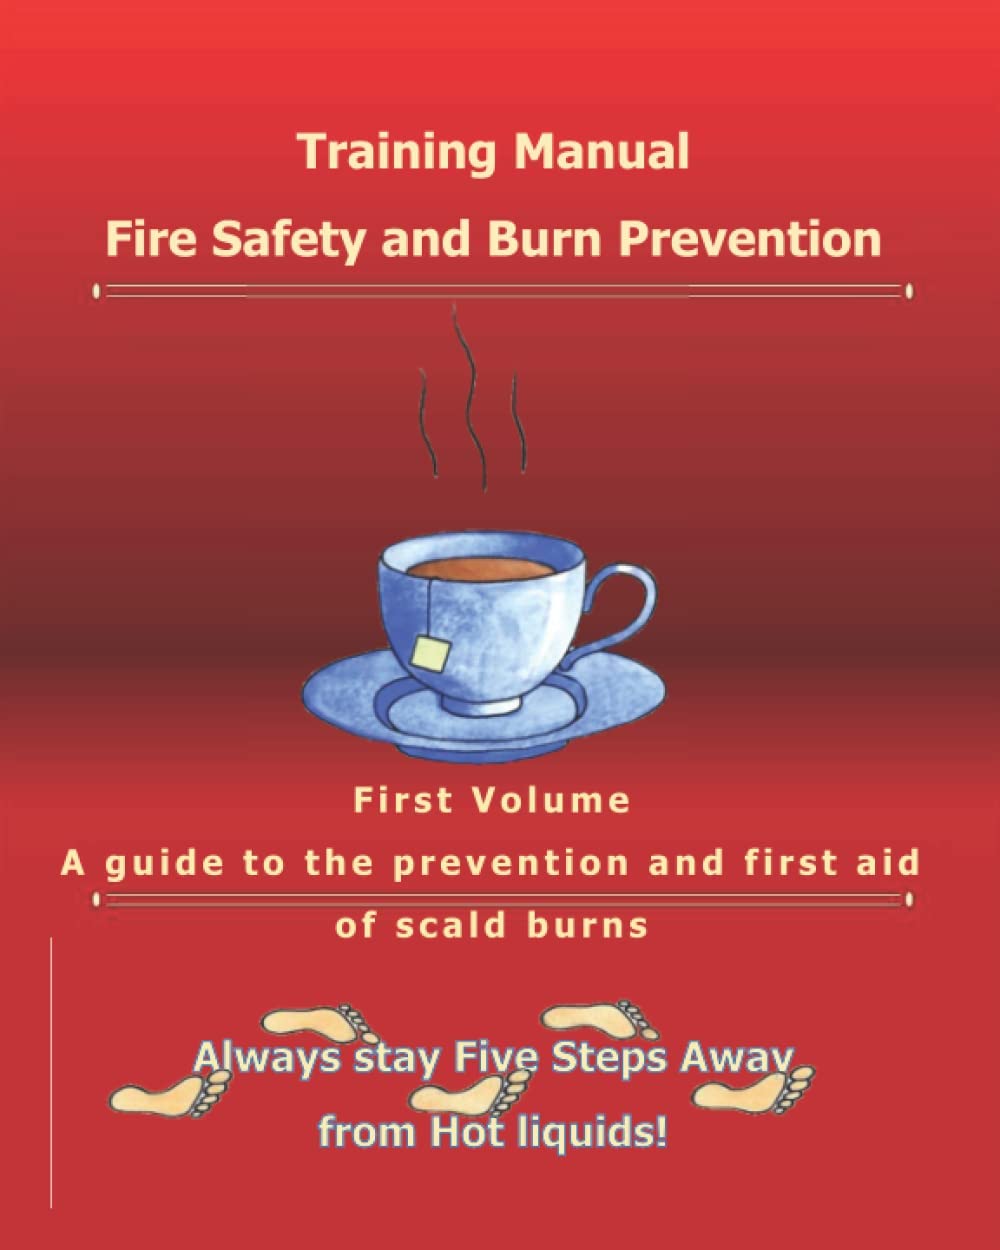 Fire Safety and Burn Prevention Training Manual: A guide to the prevention and first aid of scald burns